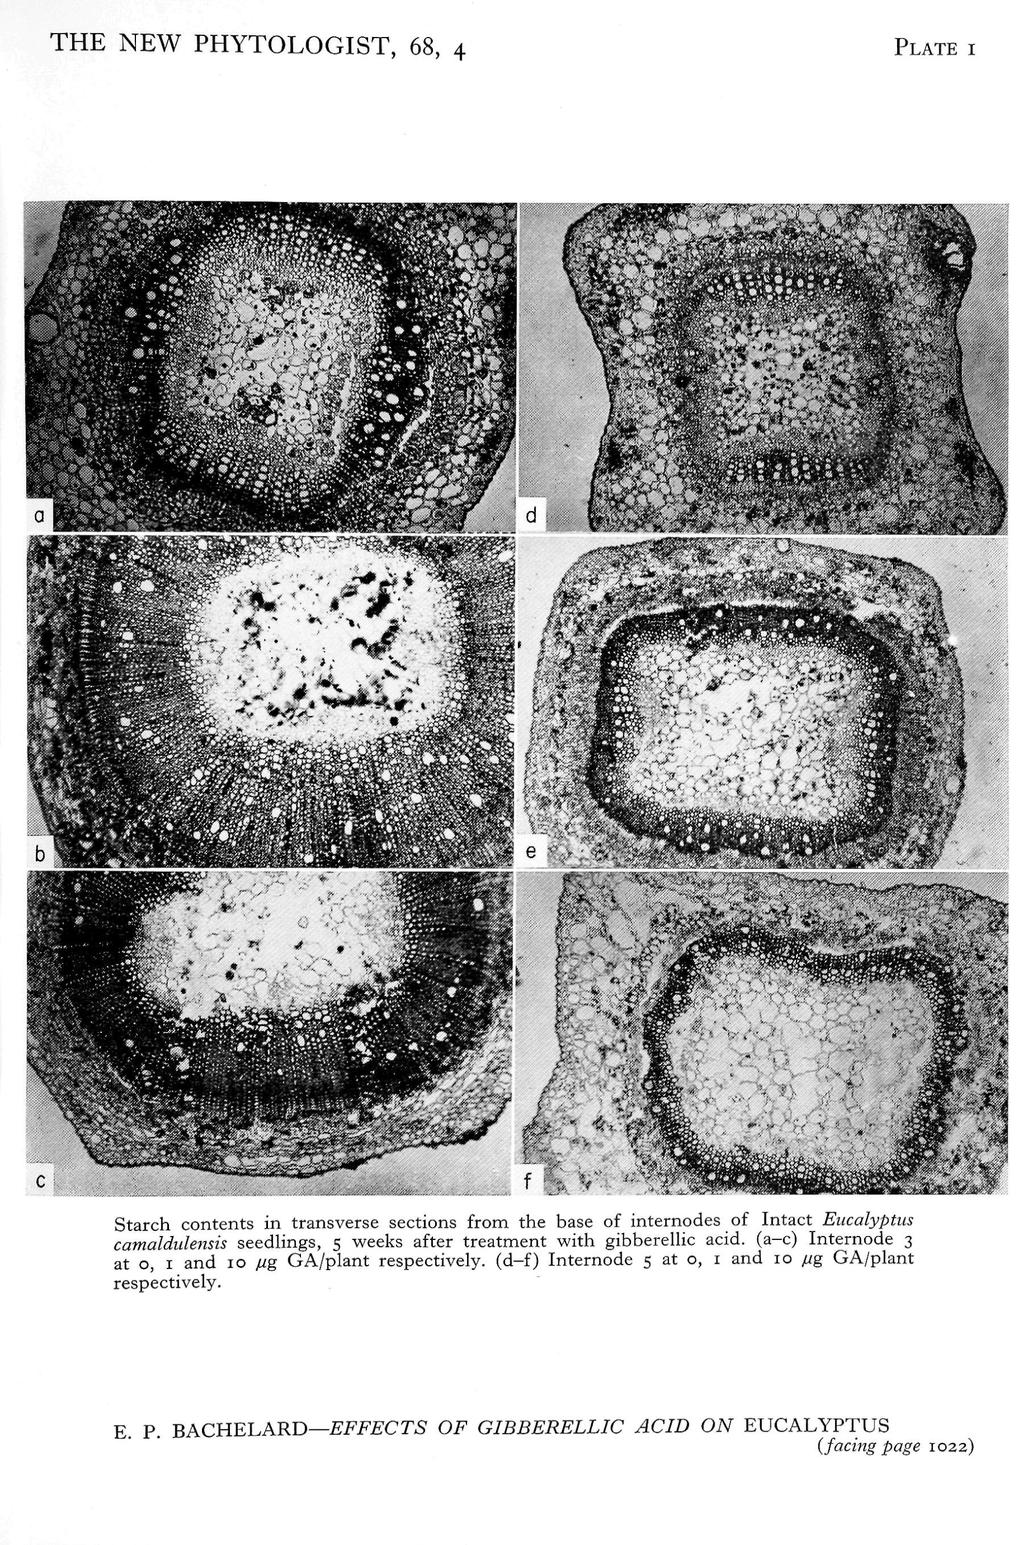 THE NEW PHYTOLOGIST, 8, 4 PLATE I Starch contents in transverse sections from the base of internodes of Intact Eucalyptus camaldulensis seedlings, 5 weeks after treatment with